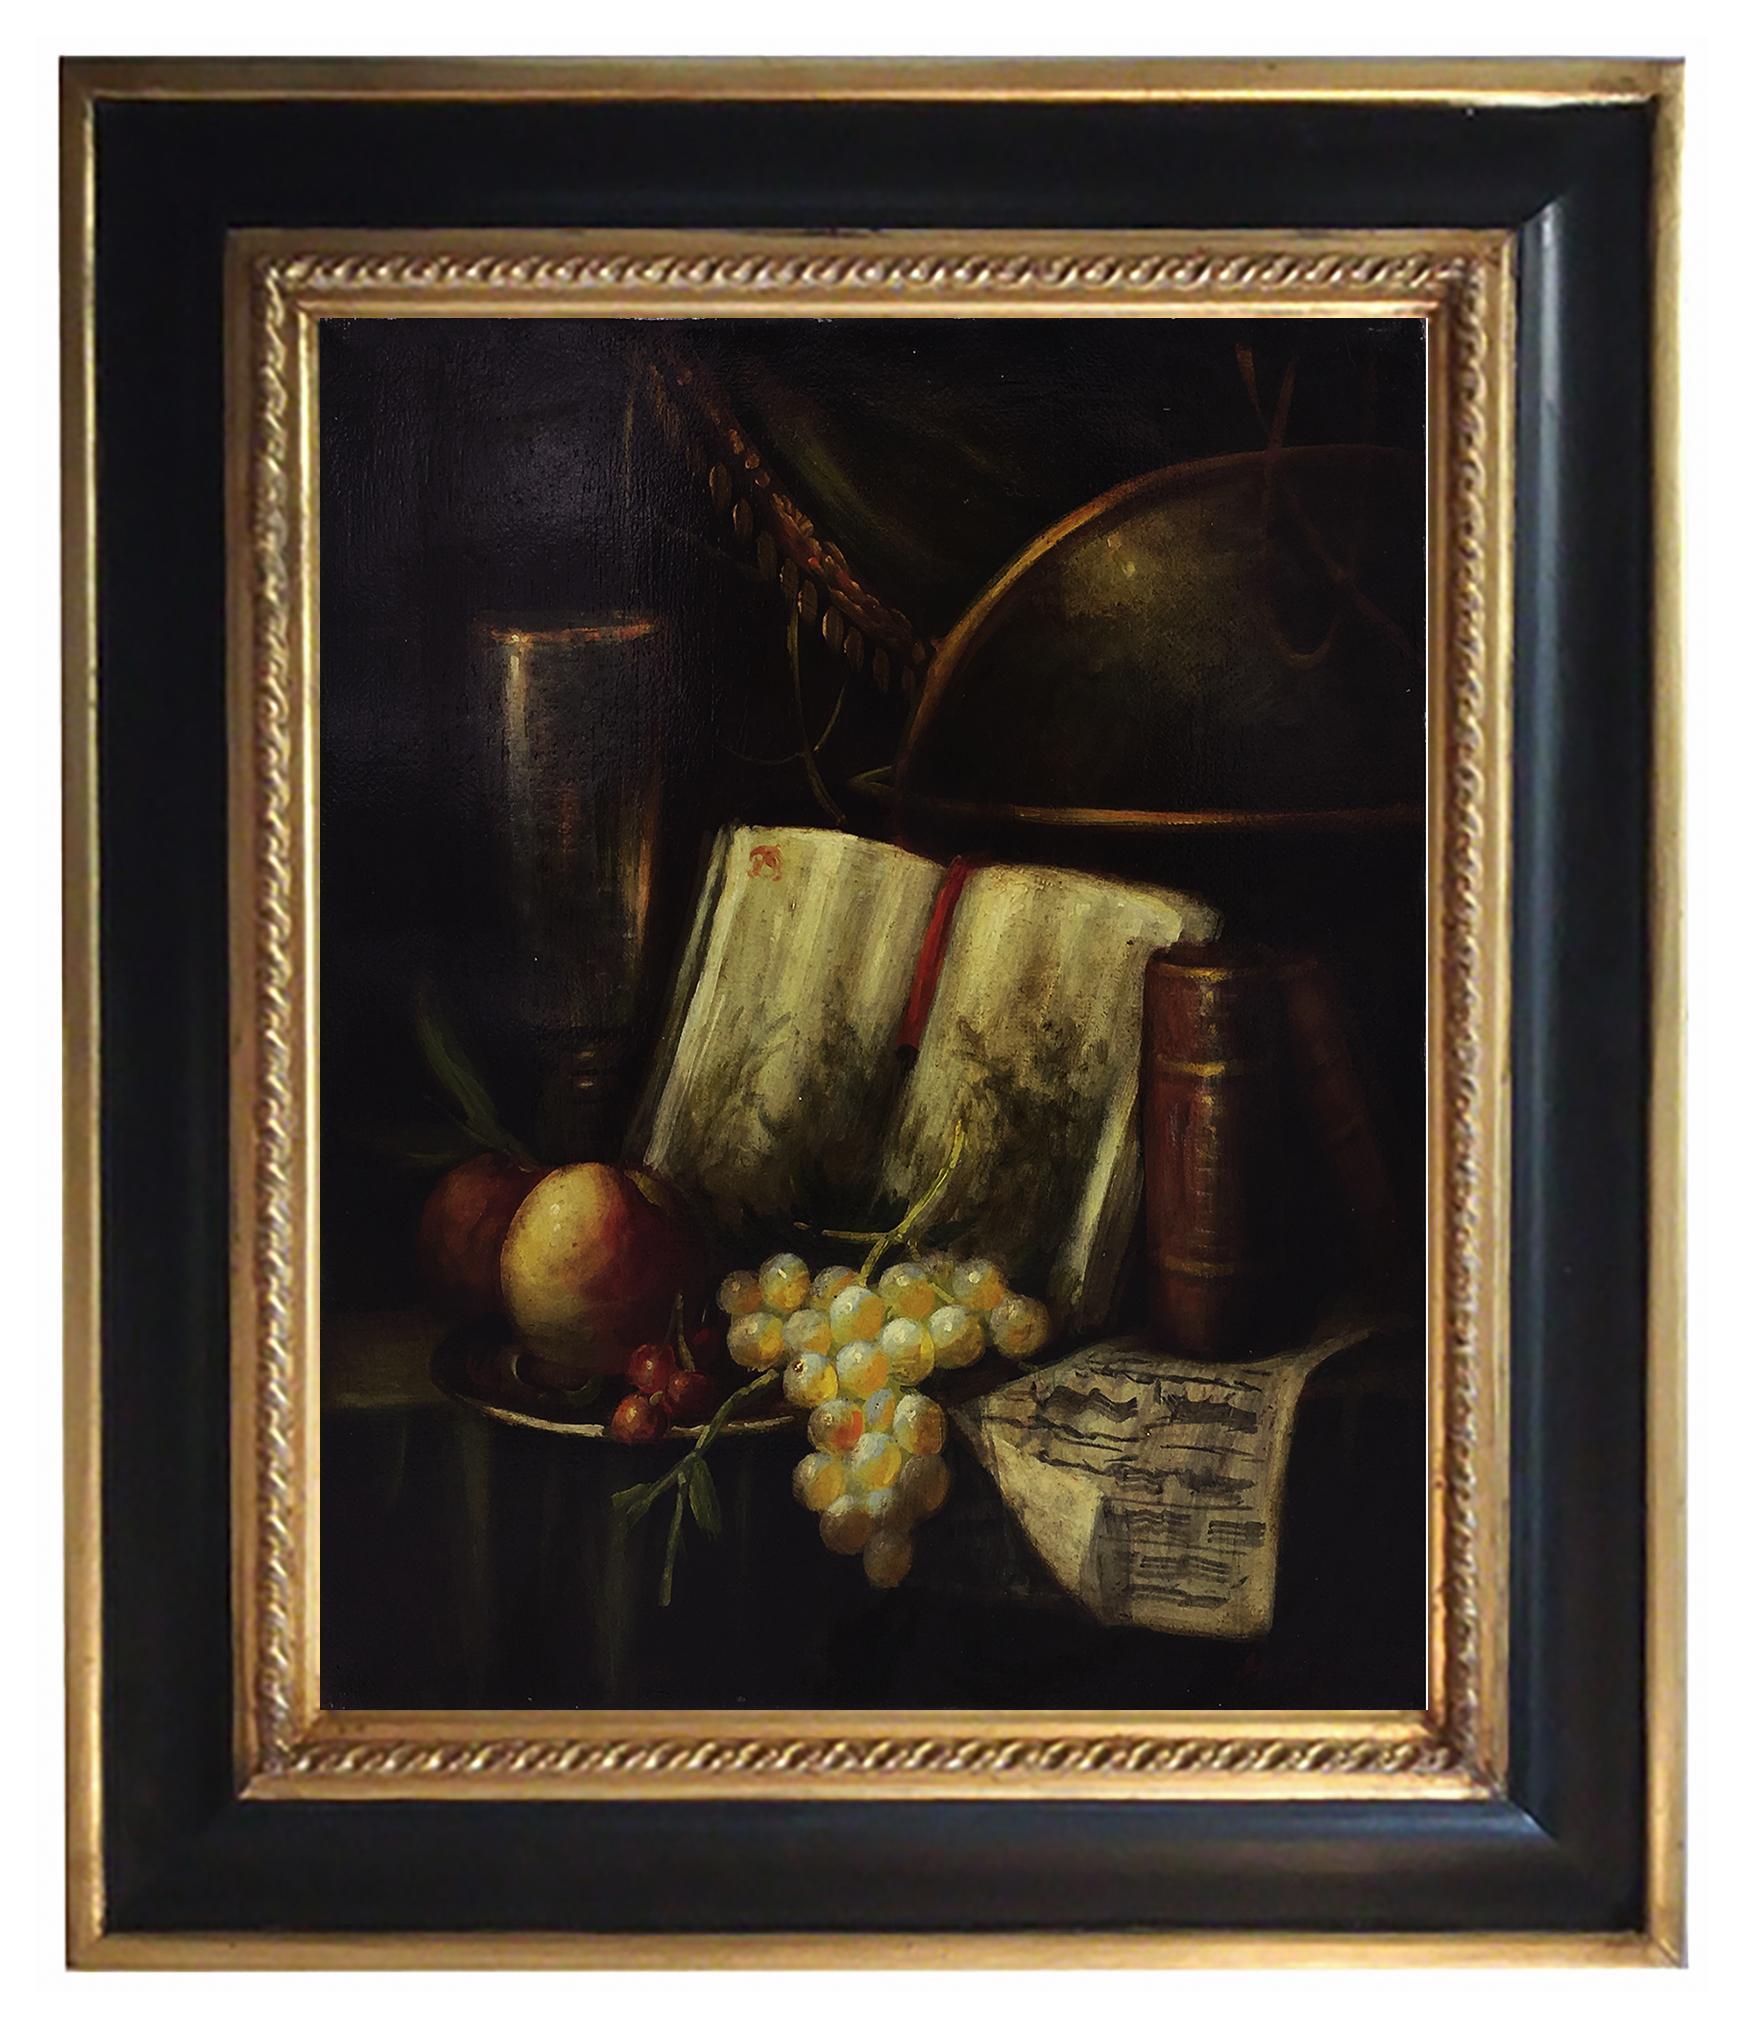 STILL LIFE - Oil on canvas painting by Massimo Reggiani, Italy 2006
The origins of still life can be found in Dutch painting. At the beginning of Dutch painting, artists included additional elements in their religious compositions, depicting them in